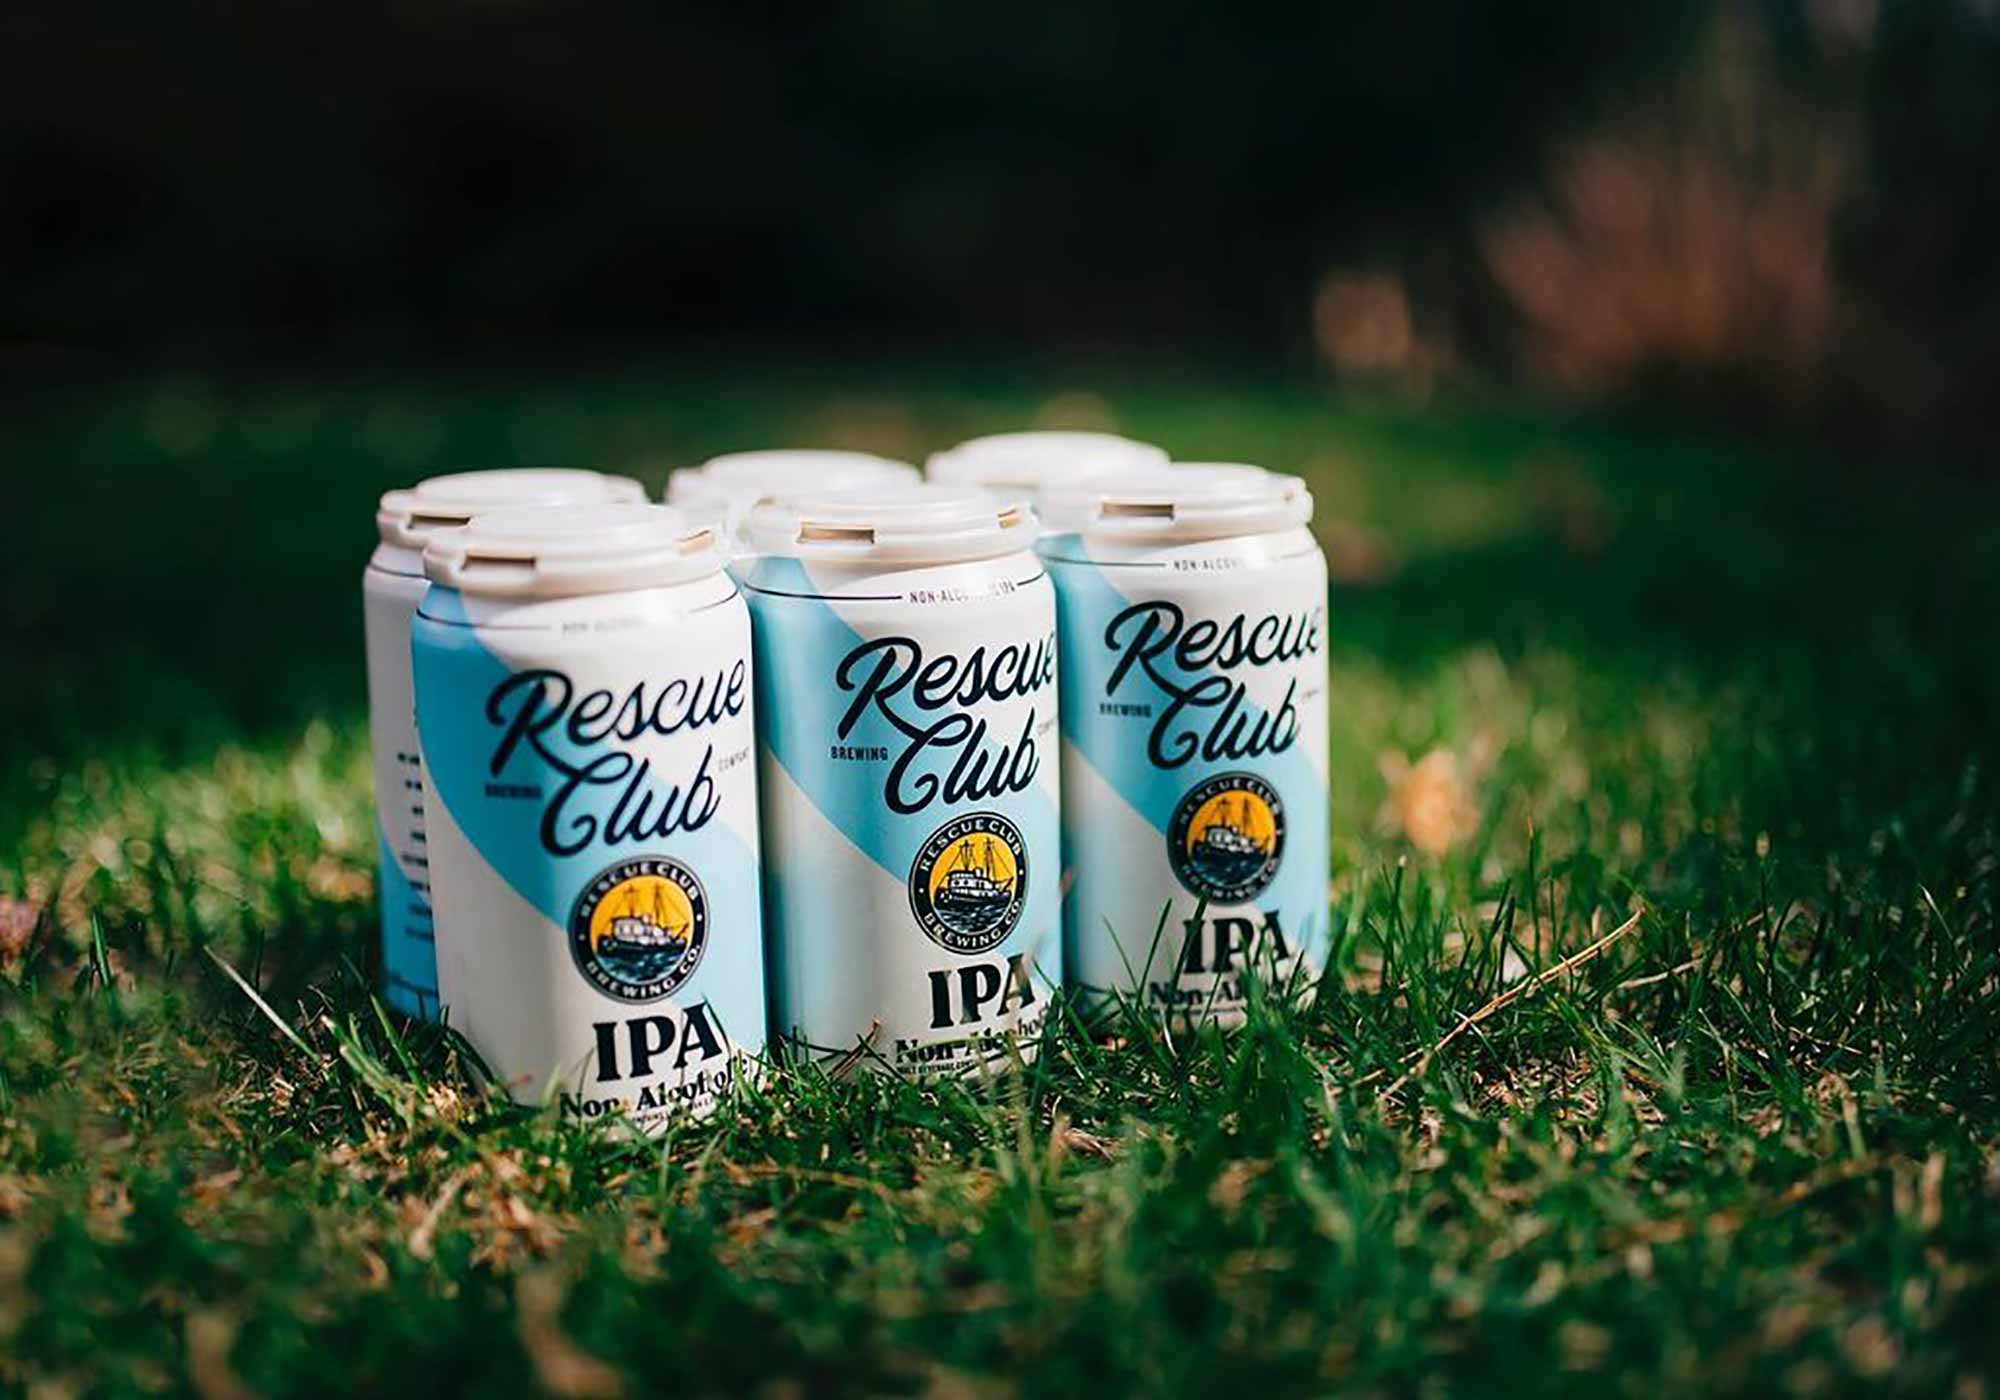 Major New England Brewery Signals A Growing Trend With Rescue Club, A New Non-Alcoholic Beer Brand